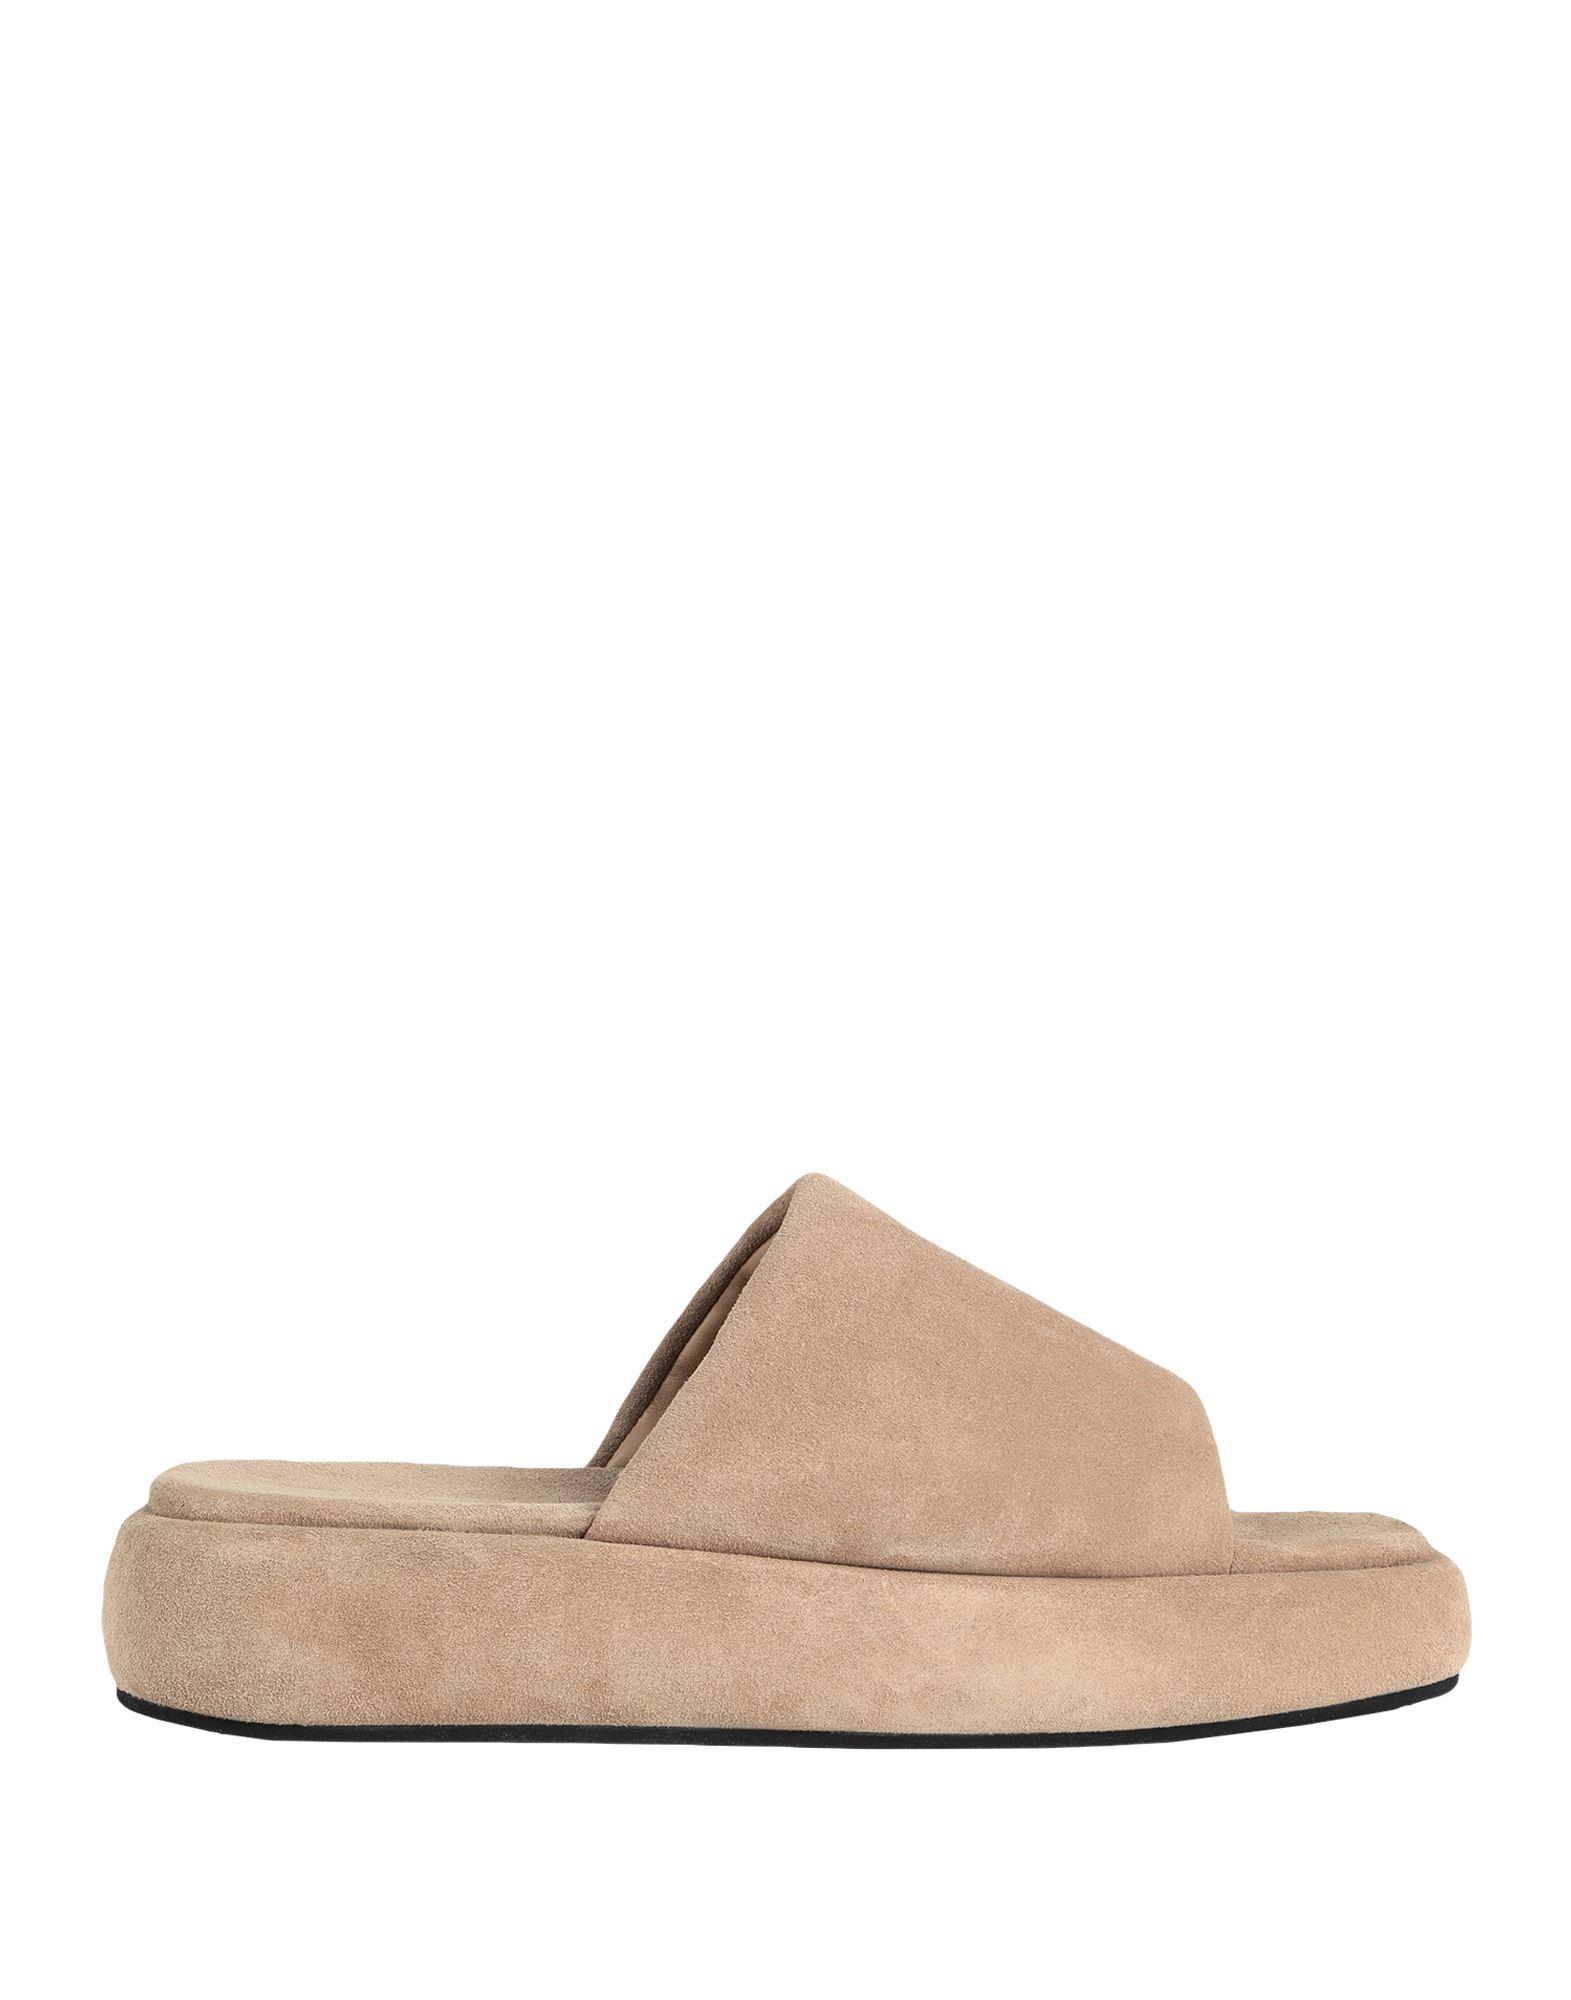 ARKET Leather Sandals in Beige (Natural) | Lyst